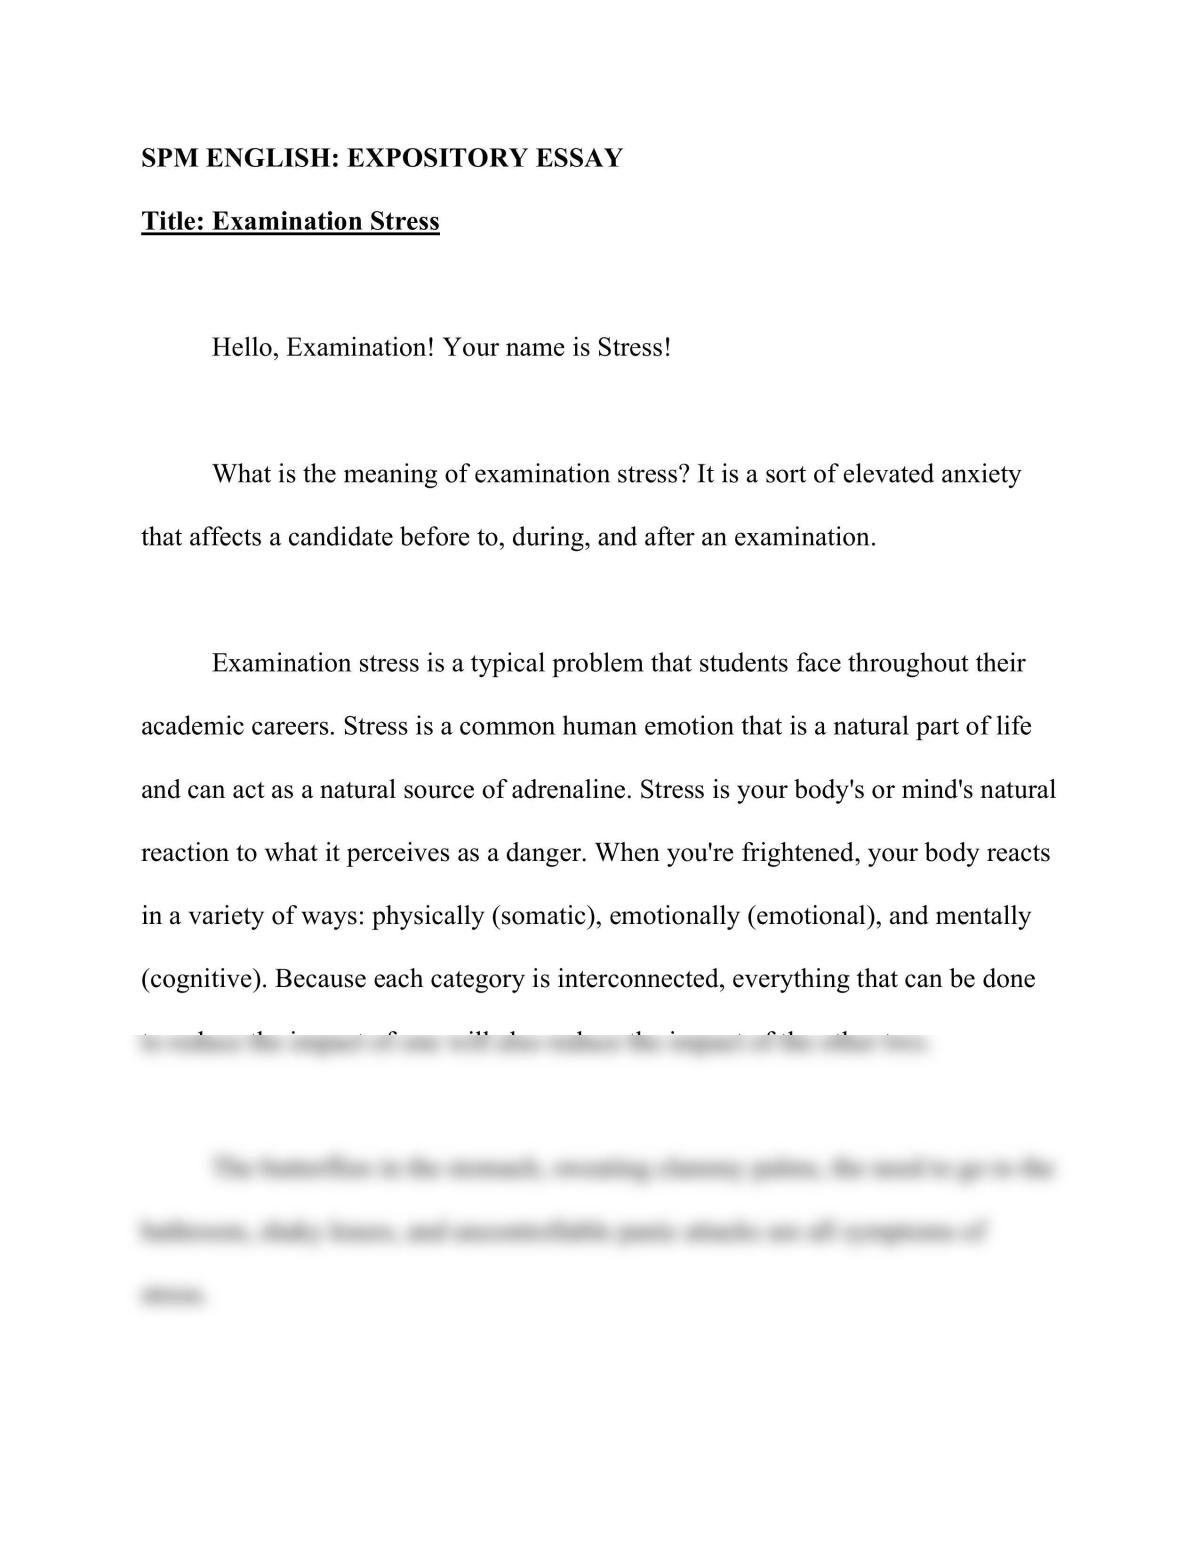 essay about examination stress